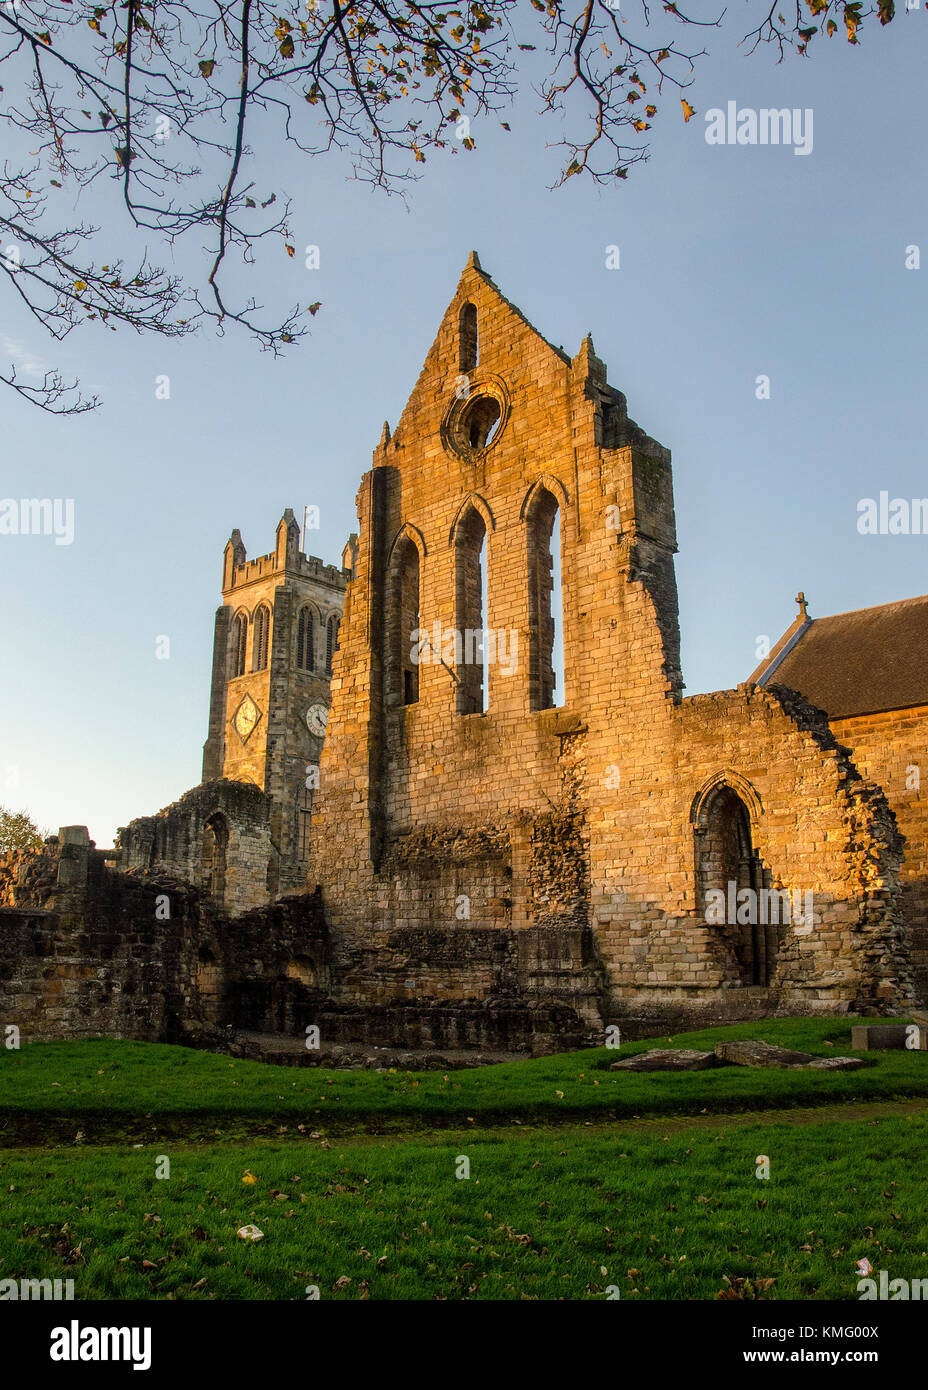 KILWINNING, SCOTLAND - NOVEMBER 12 2017: The ruins of Kilwinning Abbey during the golden hour. This abbey was home to the Tironensian monks. Stock Photo